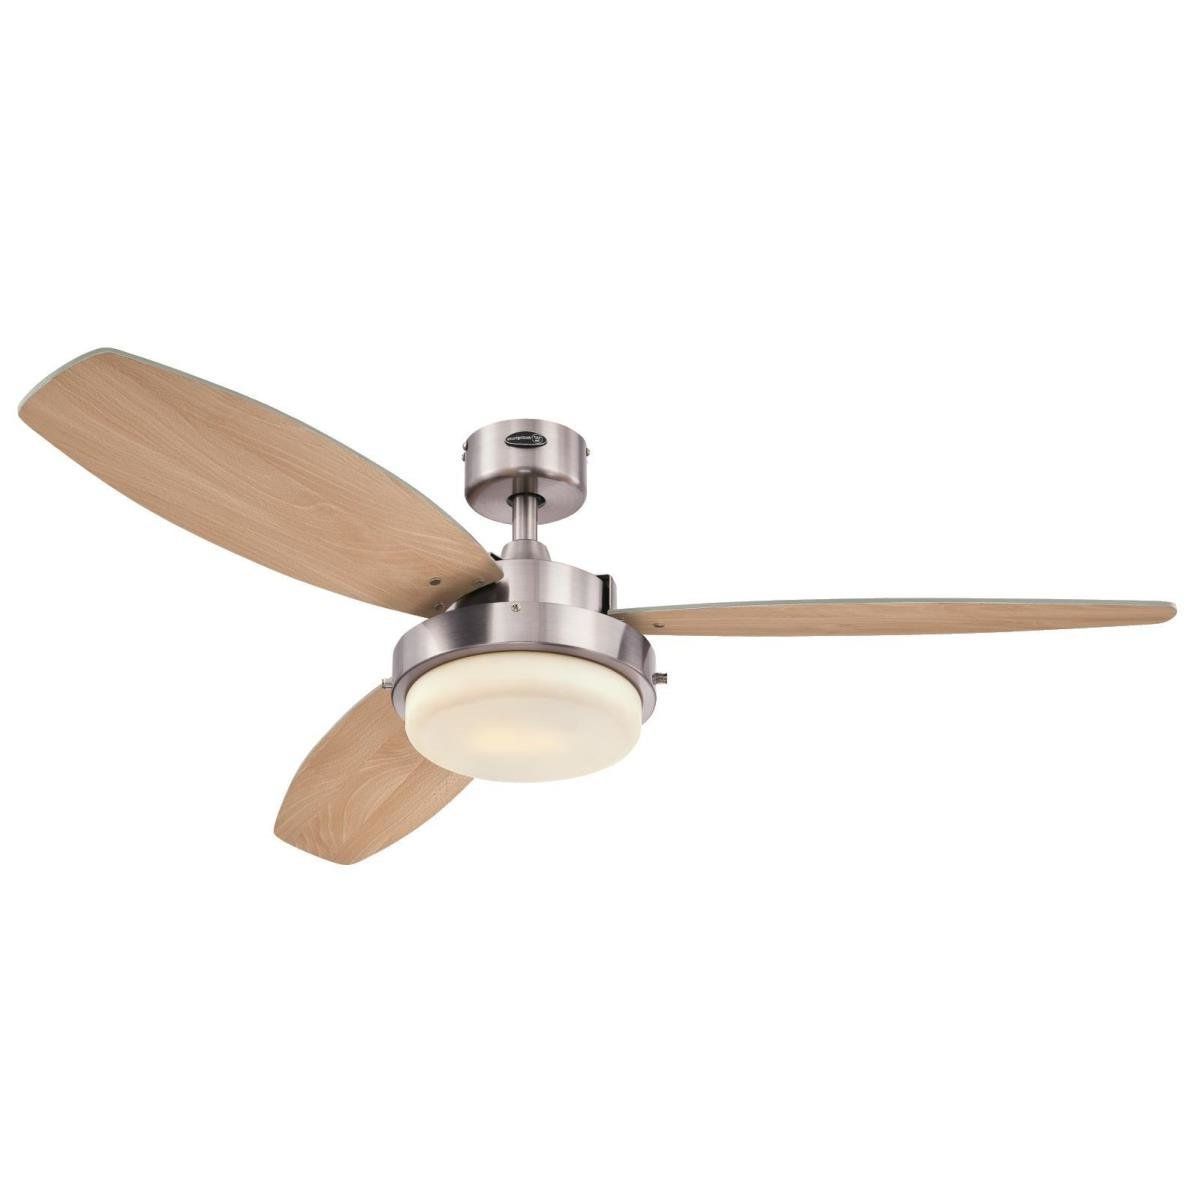 Corsa 3 Blade Ceiling Fans Throughout Fashionable 52" Corsa 3 Blade Ceiling Fan With Remote, Light Kit (Photo 5 of 20)